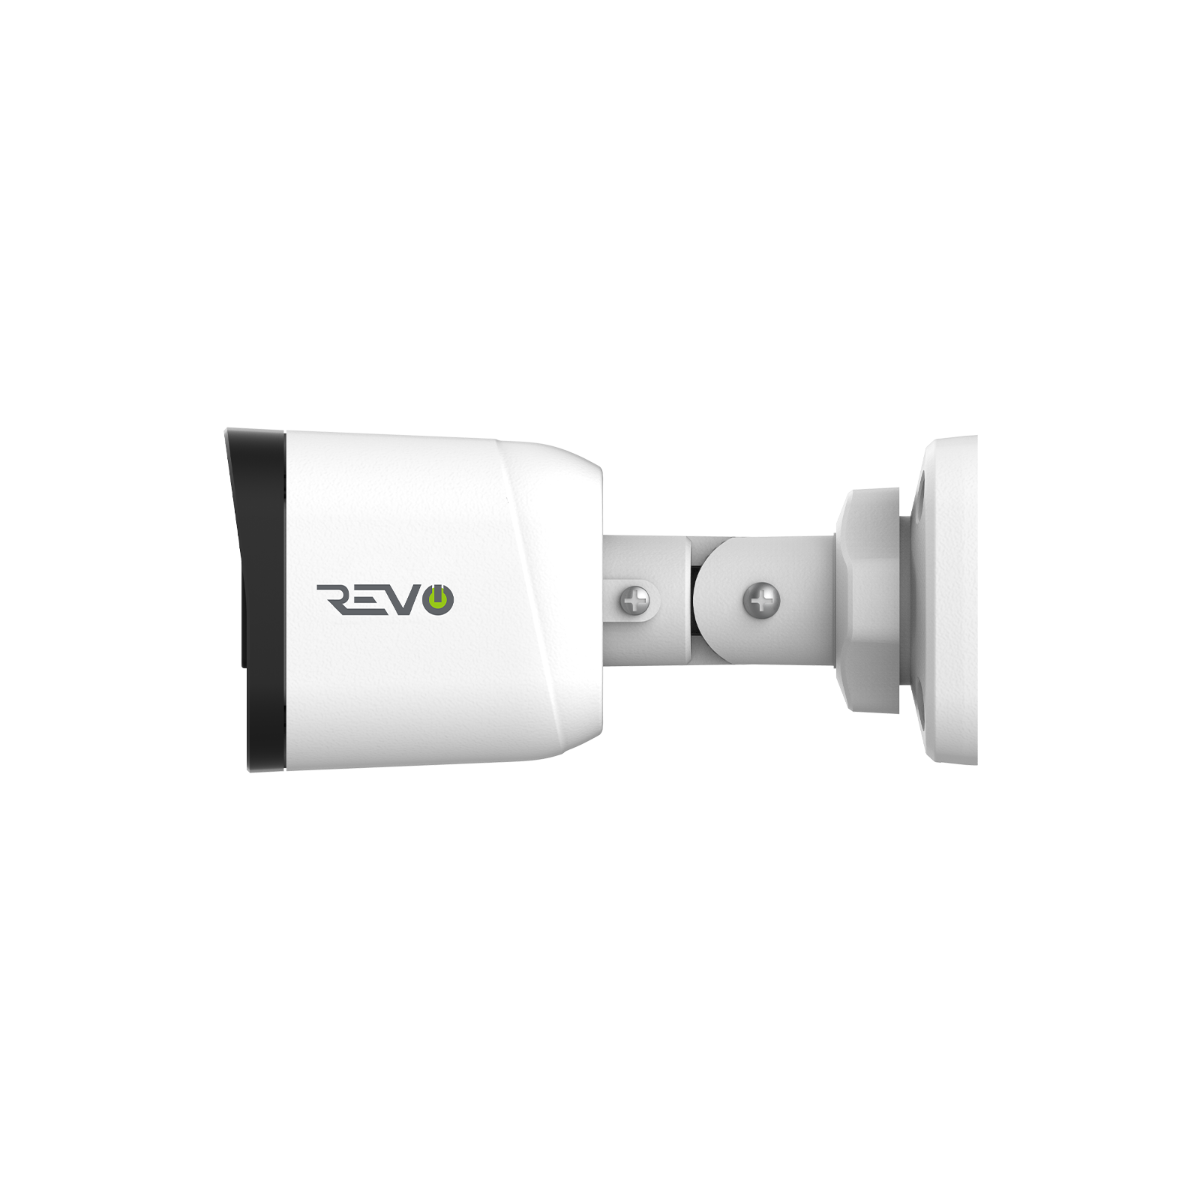 REVO ULTRA Blue Series 5MP Indoor/Outdoor IP Bullet Camera with 100’ Night Vision and Built-in Mic